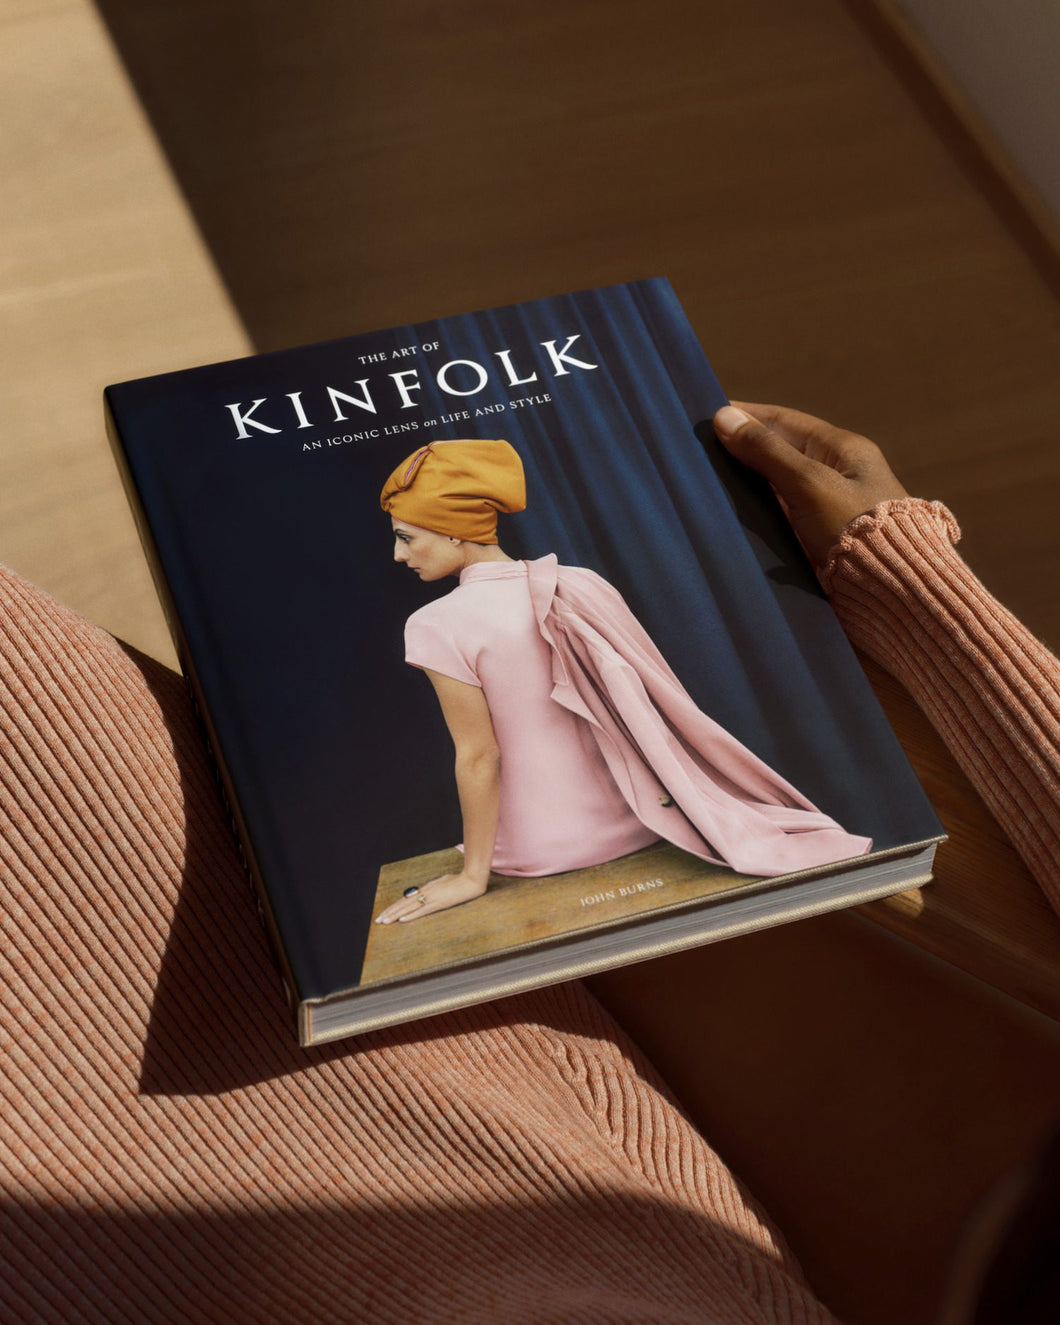 The Art of Kinfolk - An Iconic Lens on Life and Style